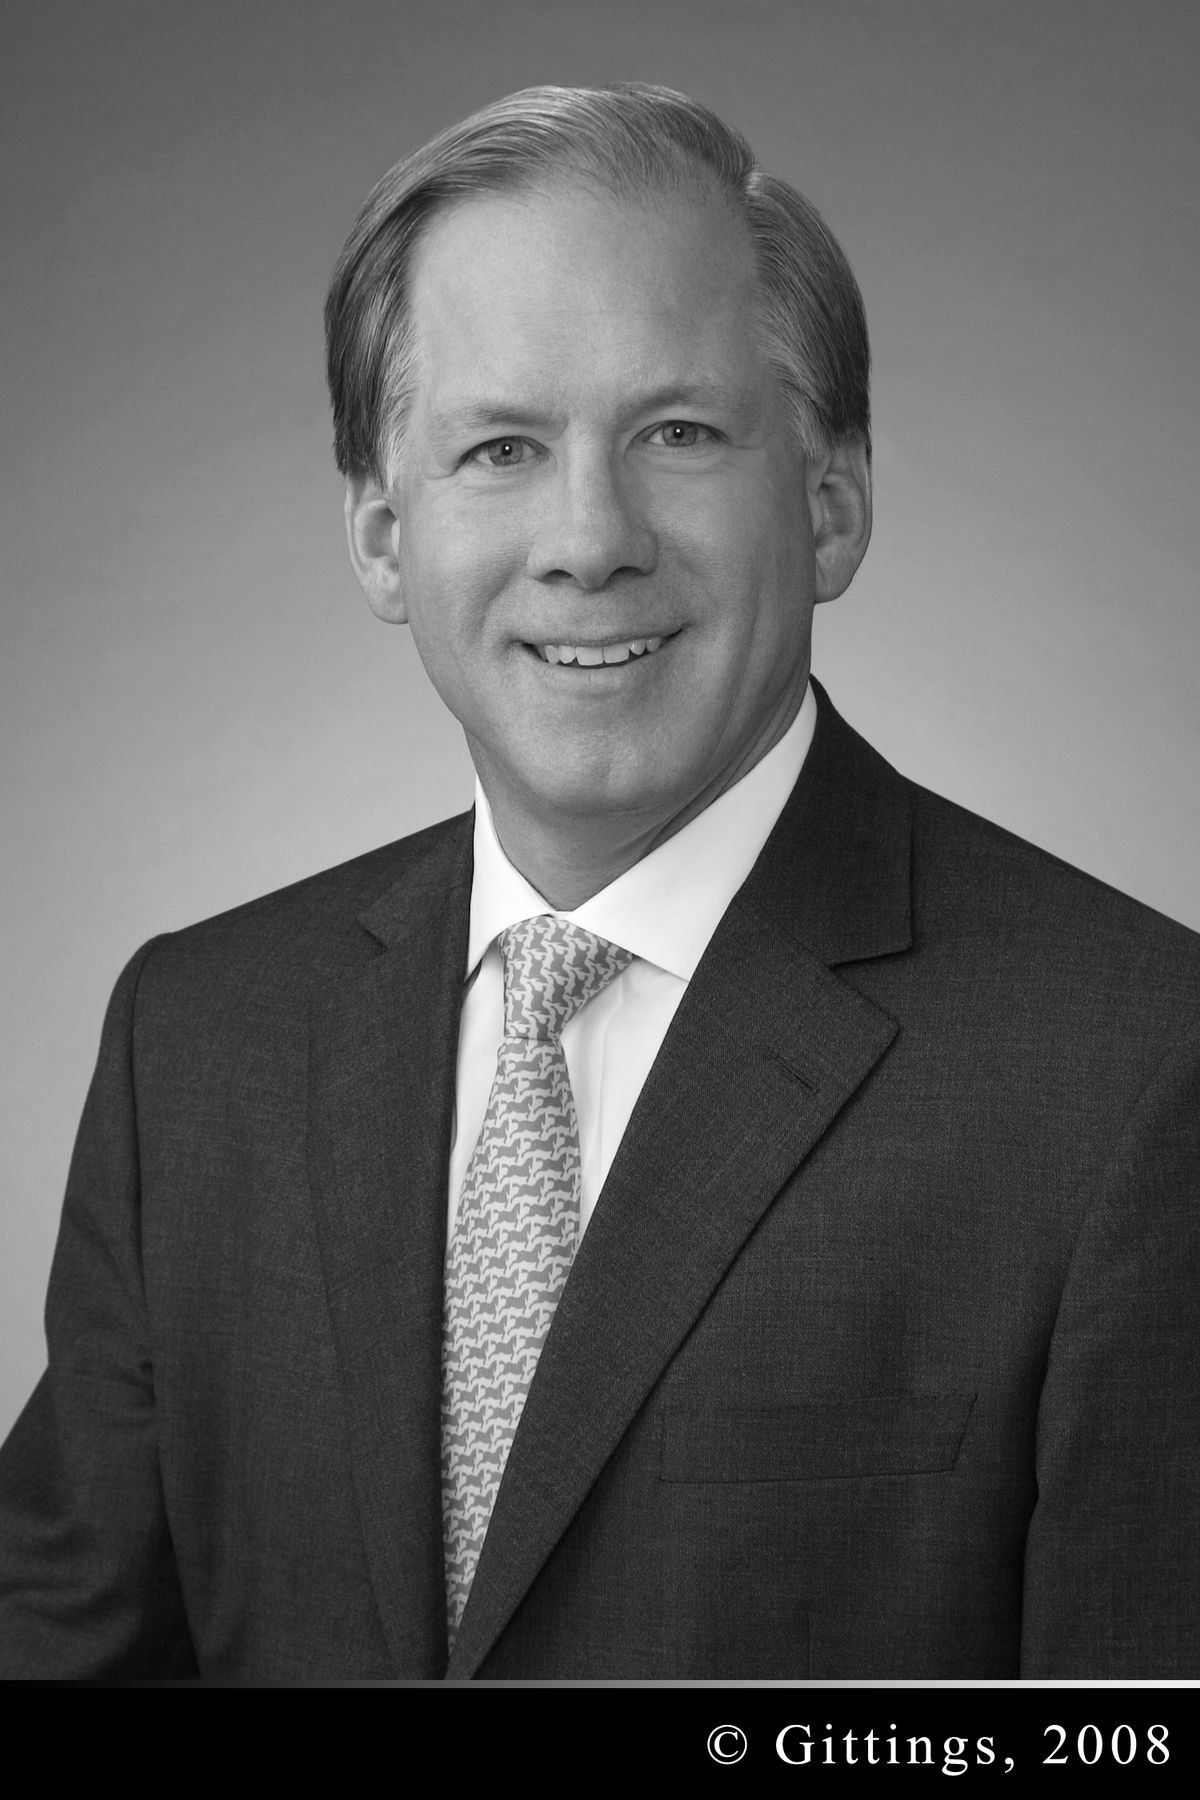 Speaker: Tim Perry, Managing Director, Global Head of E&P and Co-Head of O&G Americas for Credit Suisse USA